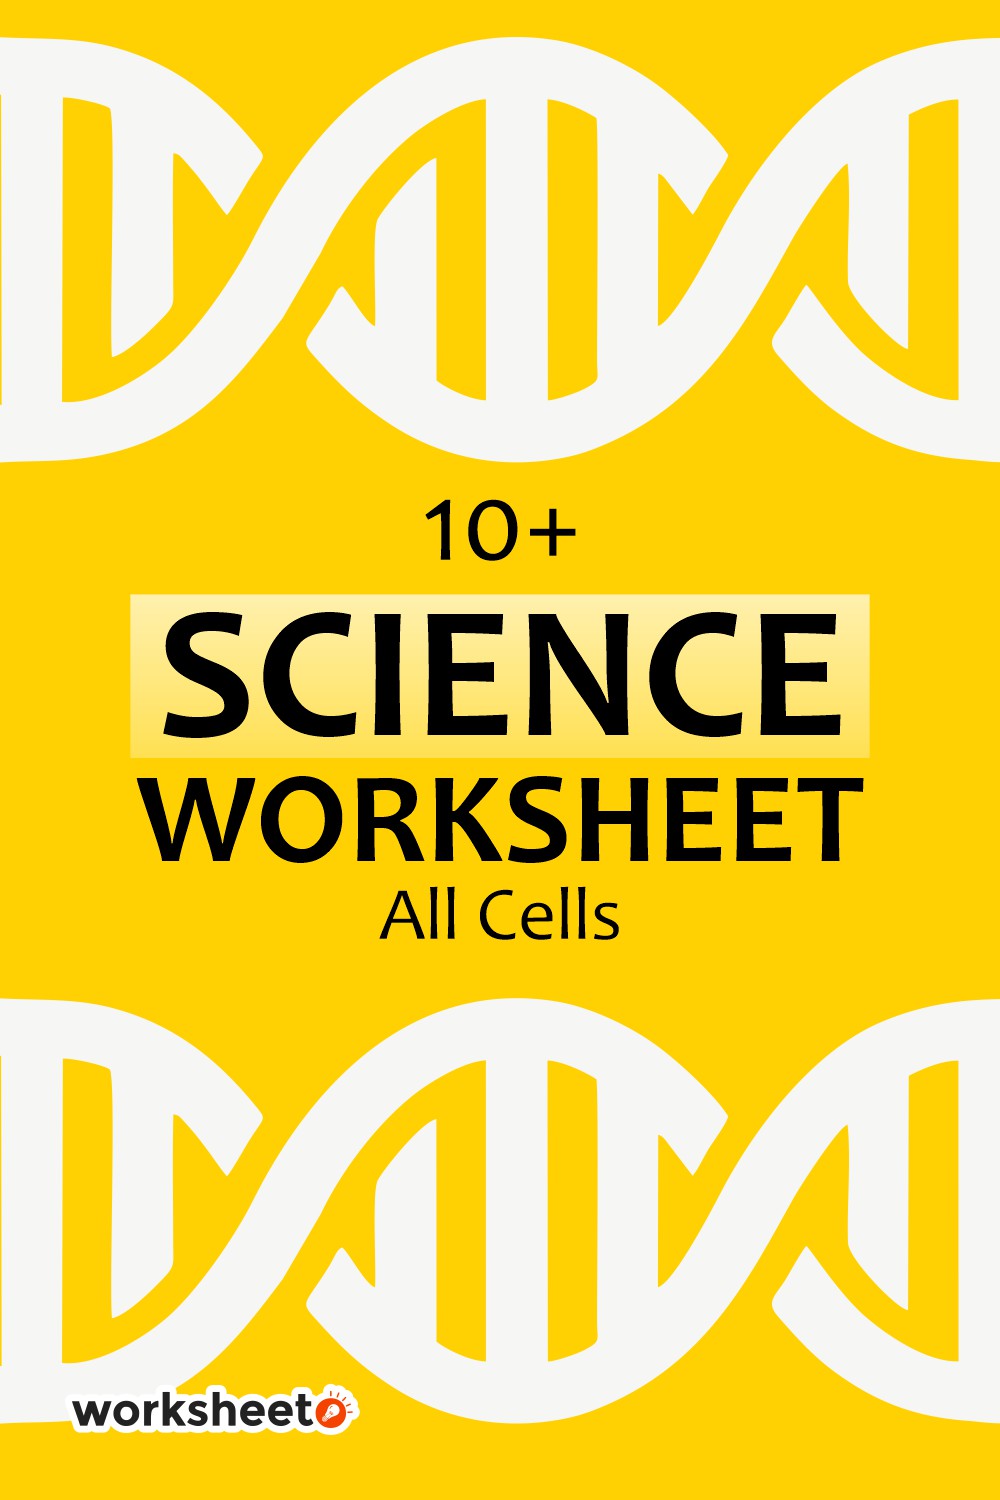 13 Images of Science Worksheets All Cells